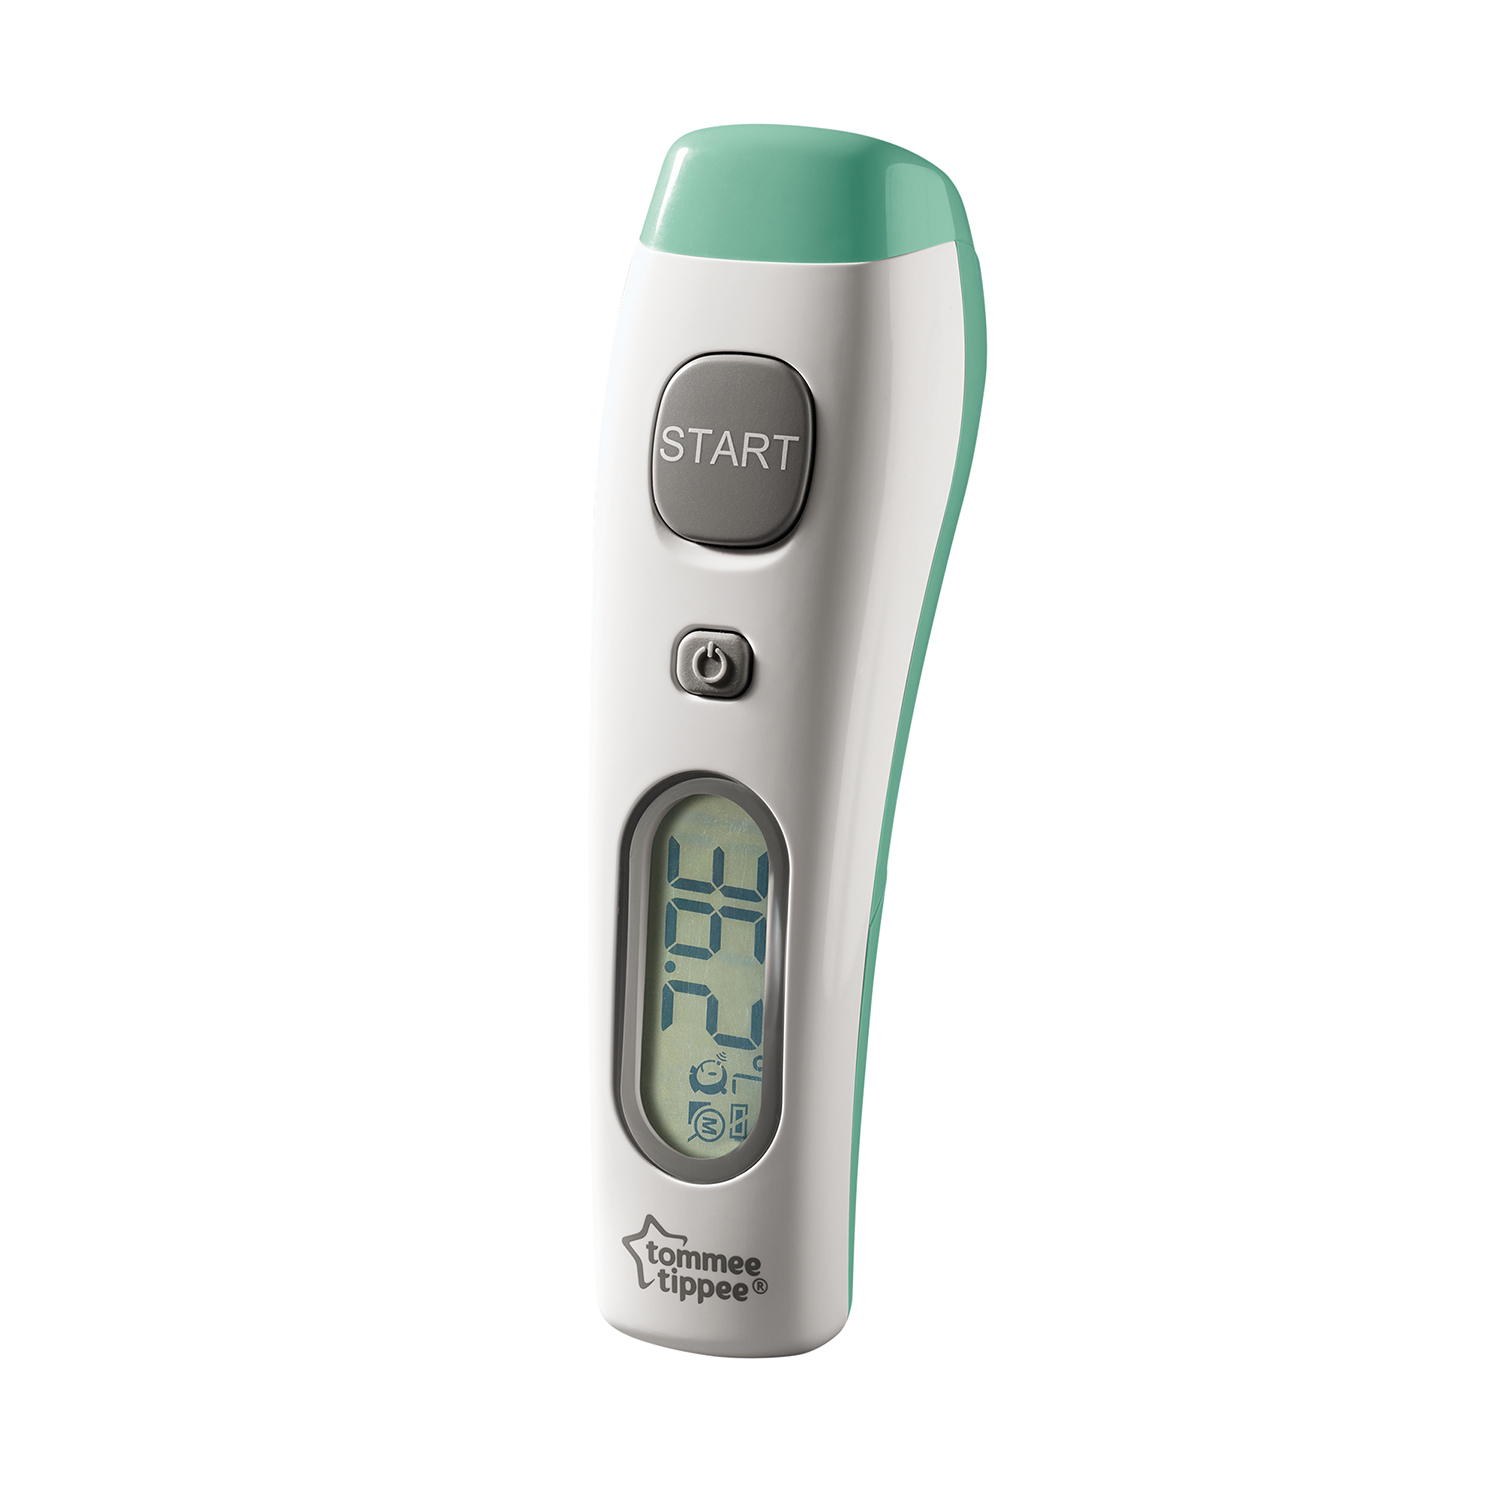 Tommee Tippee No Touch Termometer, 1 stk.